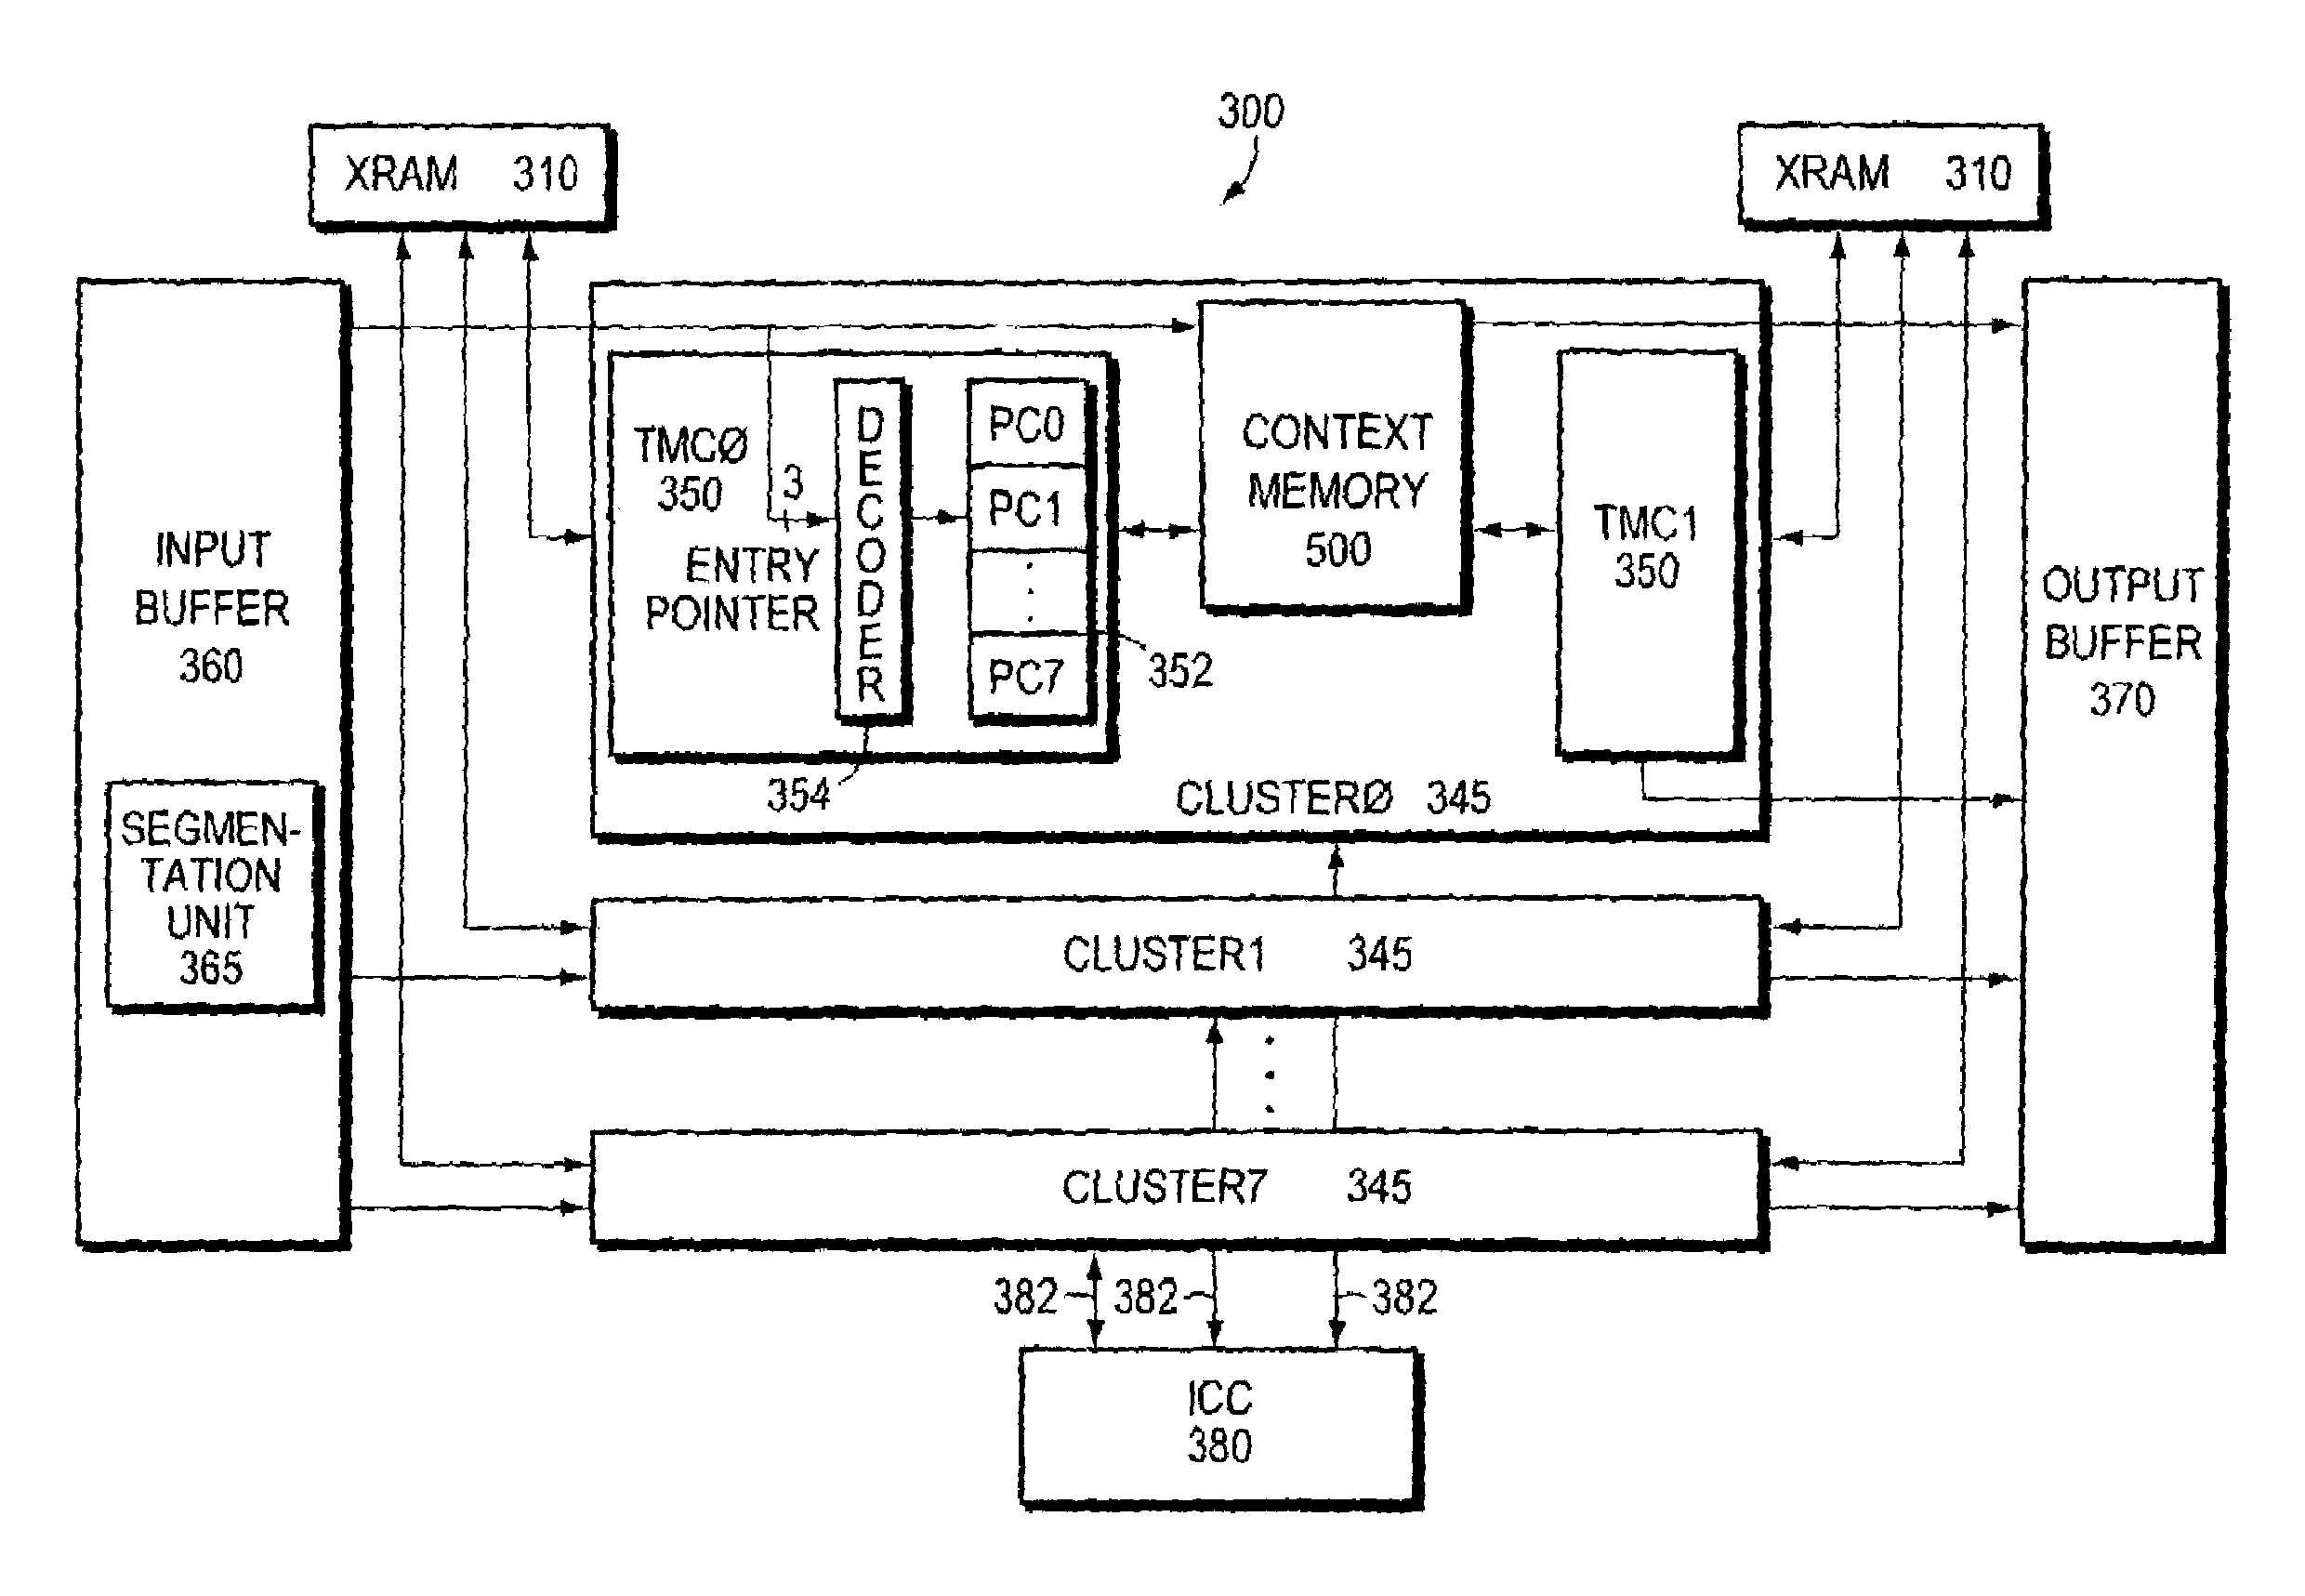 Packet striping across a parallel header processor